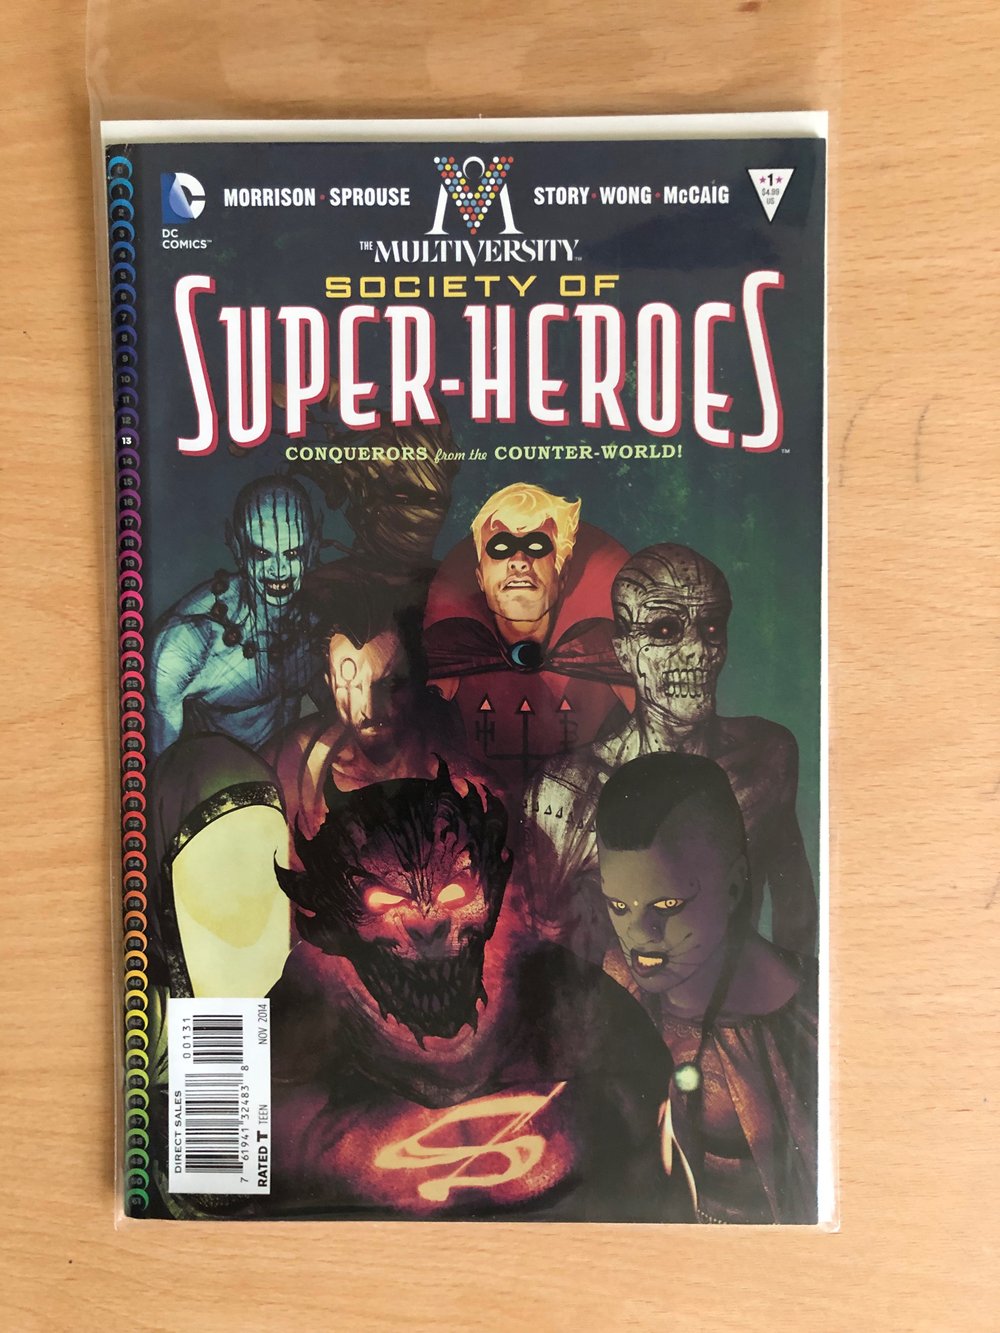 Image of Multiversity: Society of Superheroes: Conquerors from the Counter-World issue 1 (cover only)